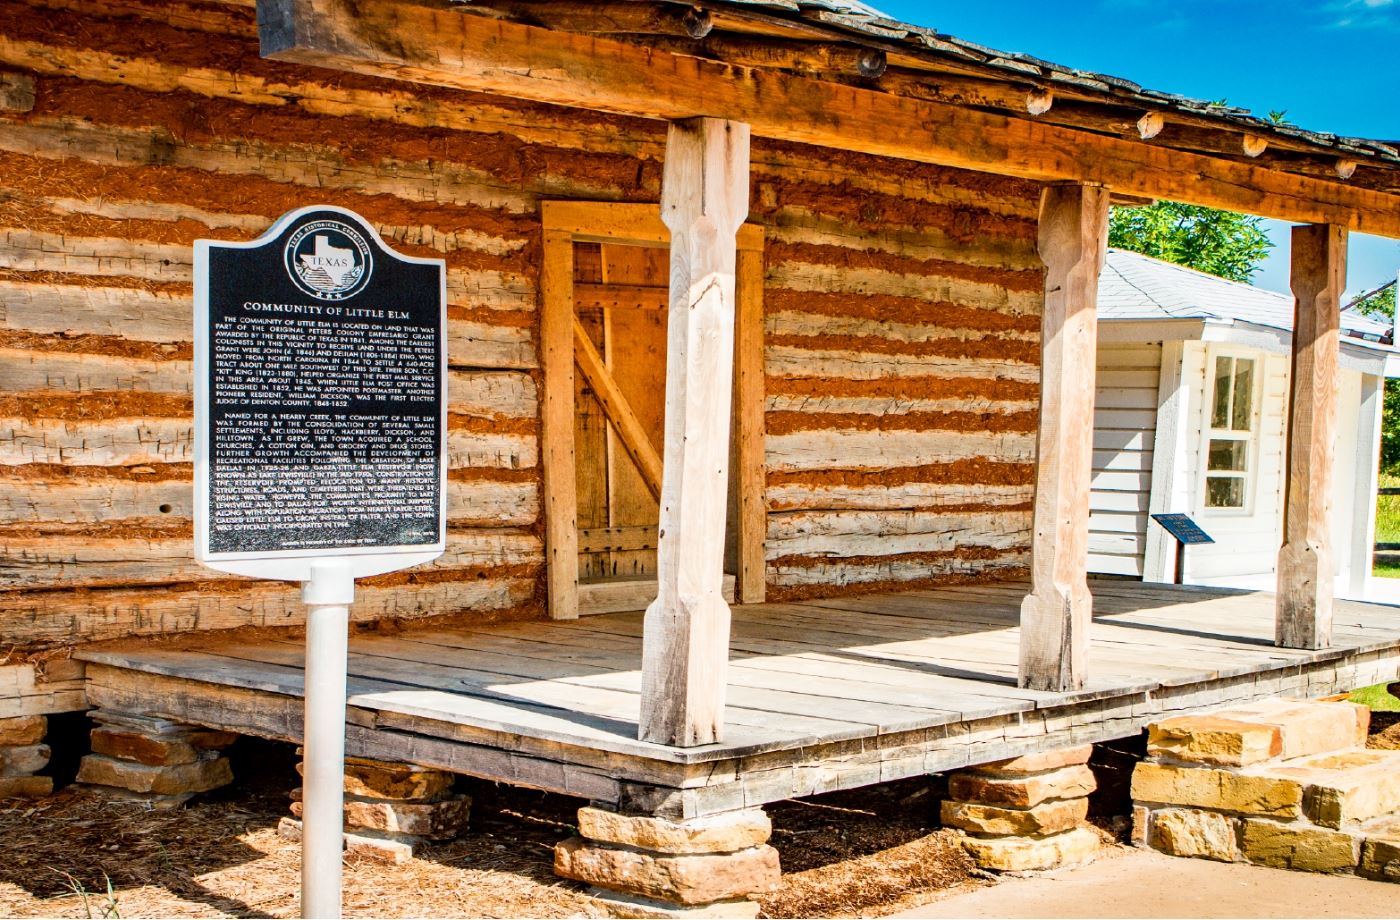 A cabin with a City of Little Elm plaque.